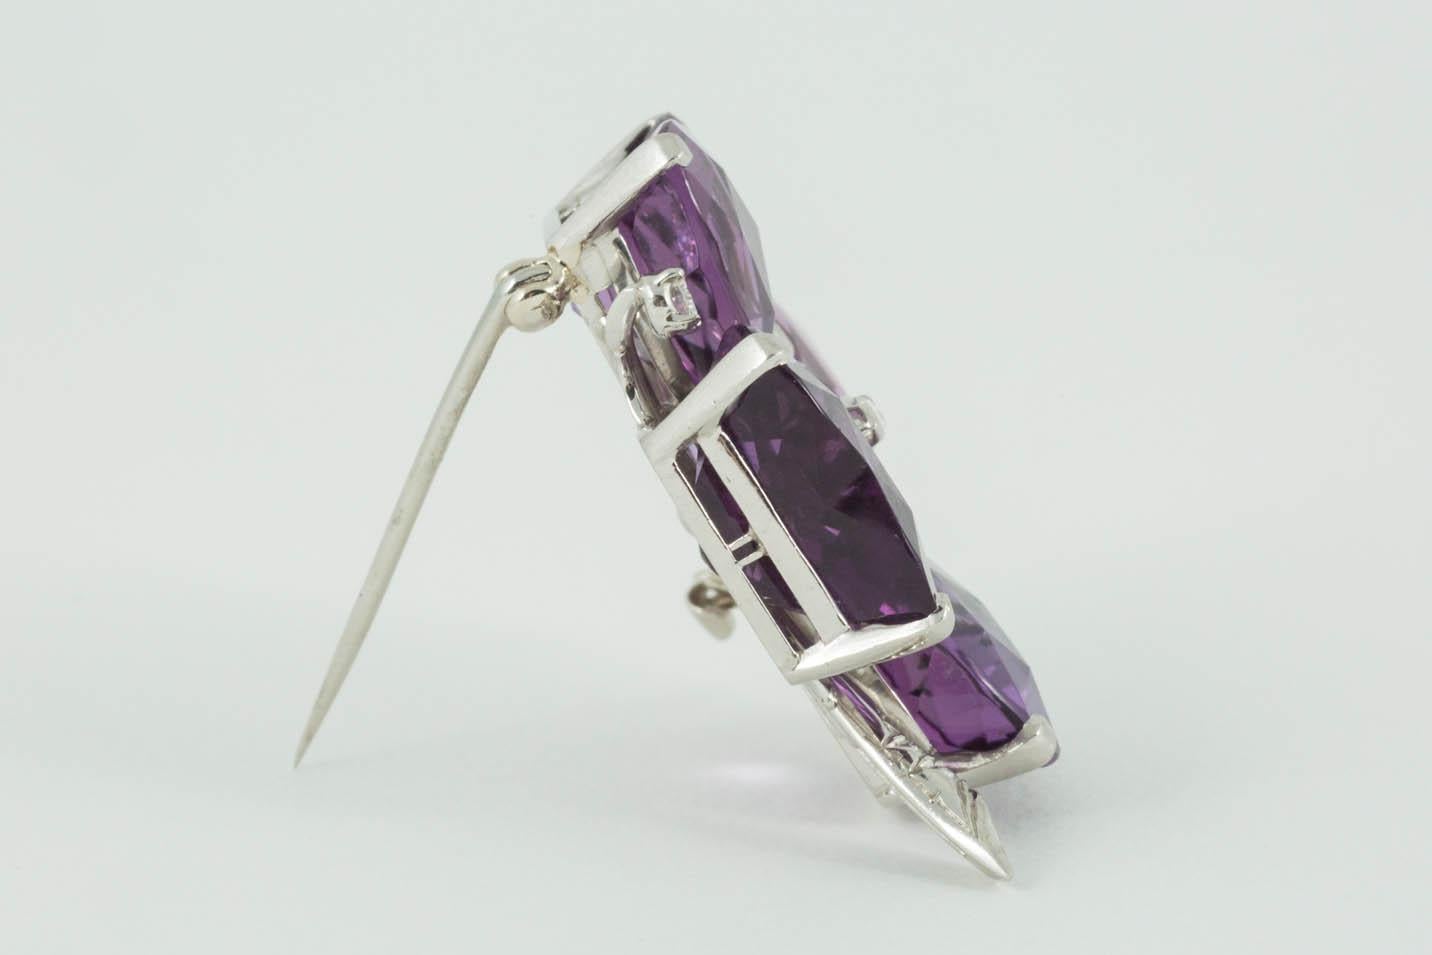 Four Leaf Clover Brooch in Platinum with Amethysts & Diamonds, USA circa 1950 For Sale 2